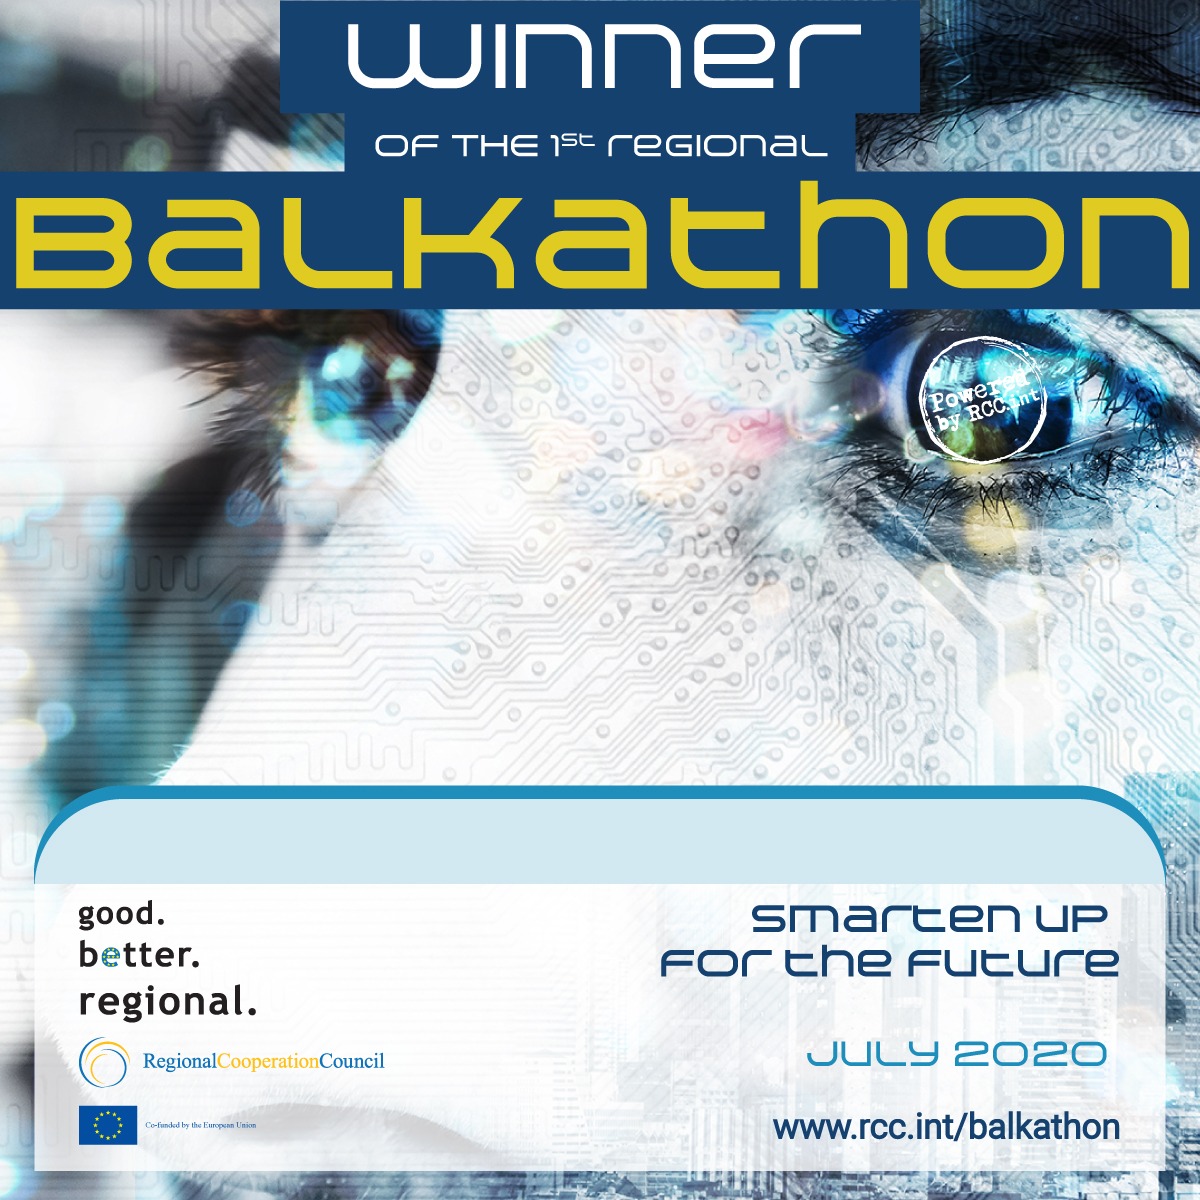 Teams awarded for their best innovative solutions for smart tourism, digital learning and online payments at Balkathon finals on 16 July 2020 